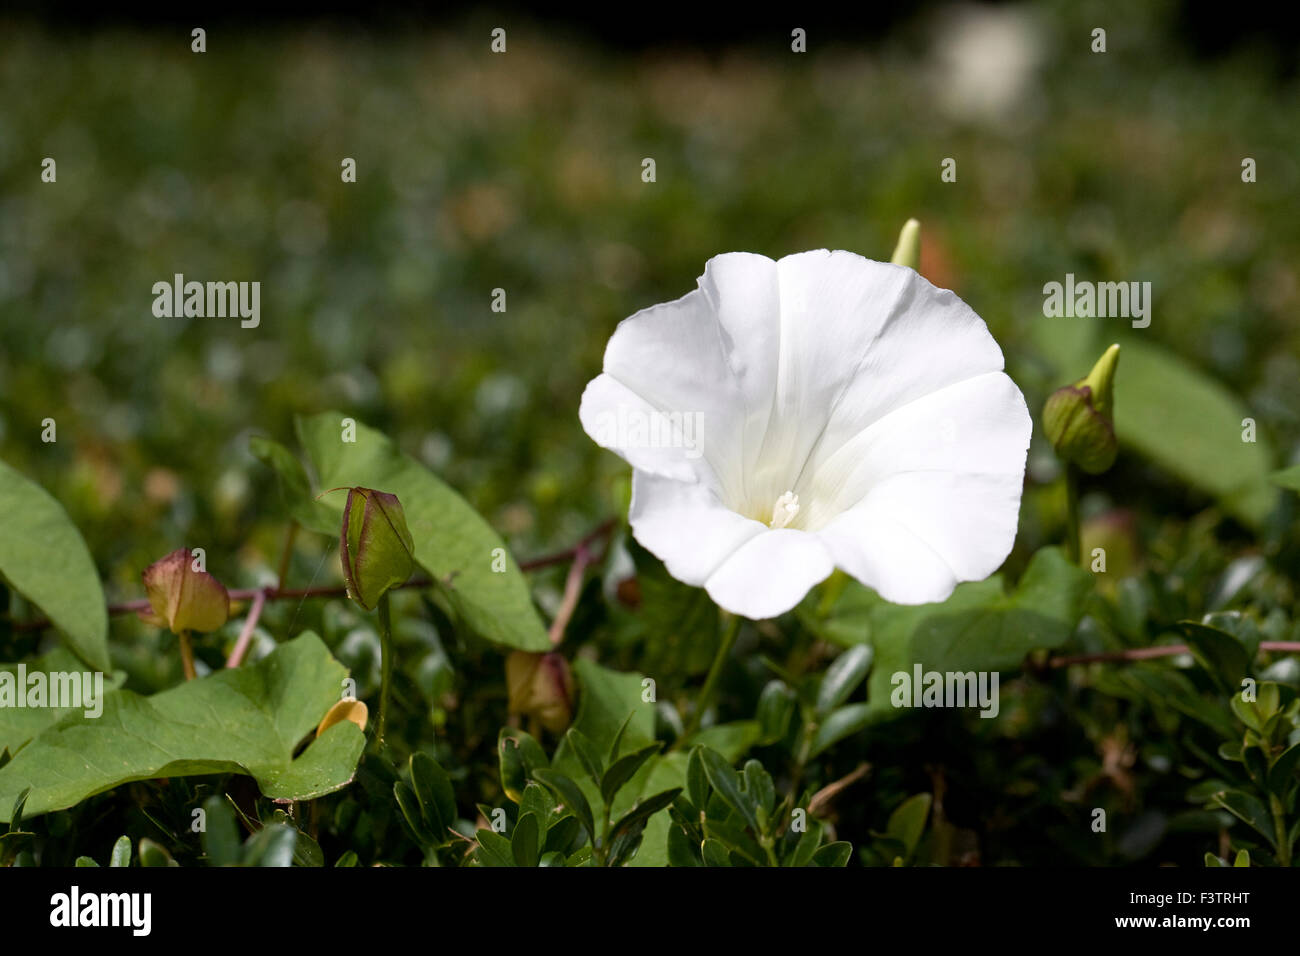 Convolvulus arvensis. Bindweed flower in the hedgerow. Stock Photo